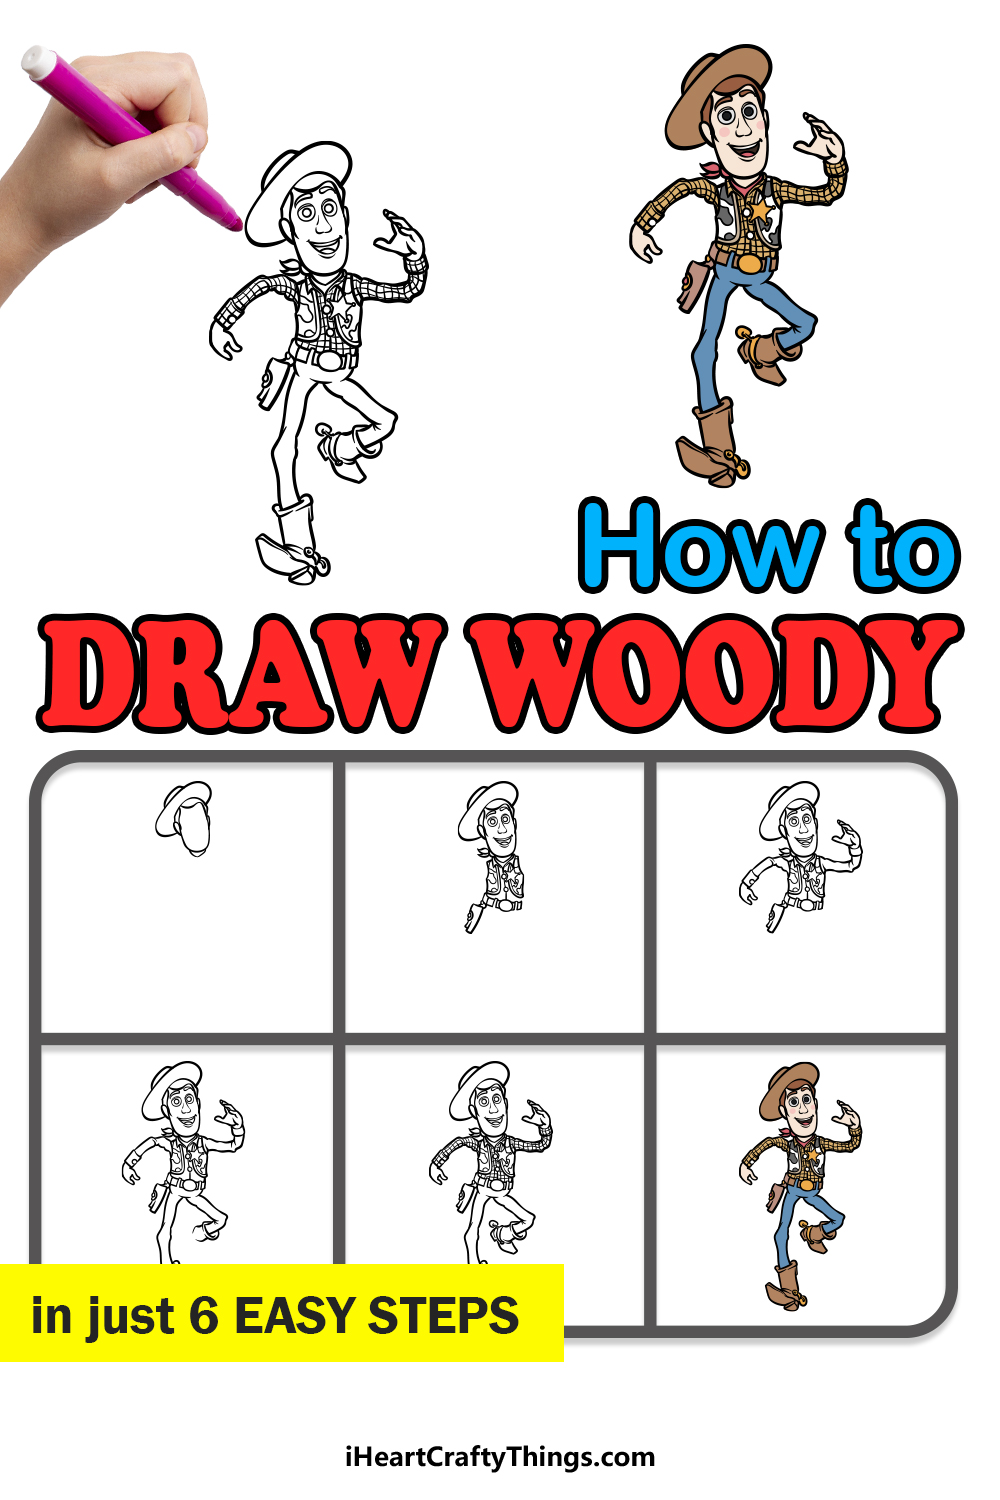 how to draw Woody in 6 easy steps